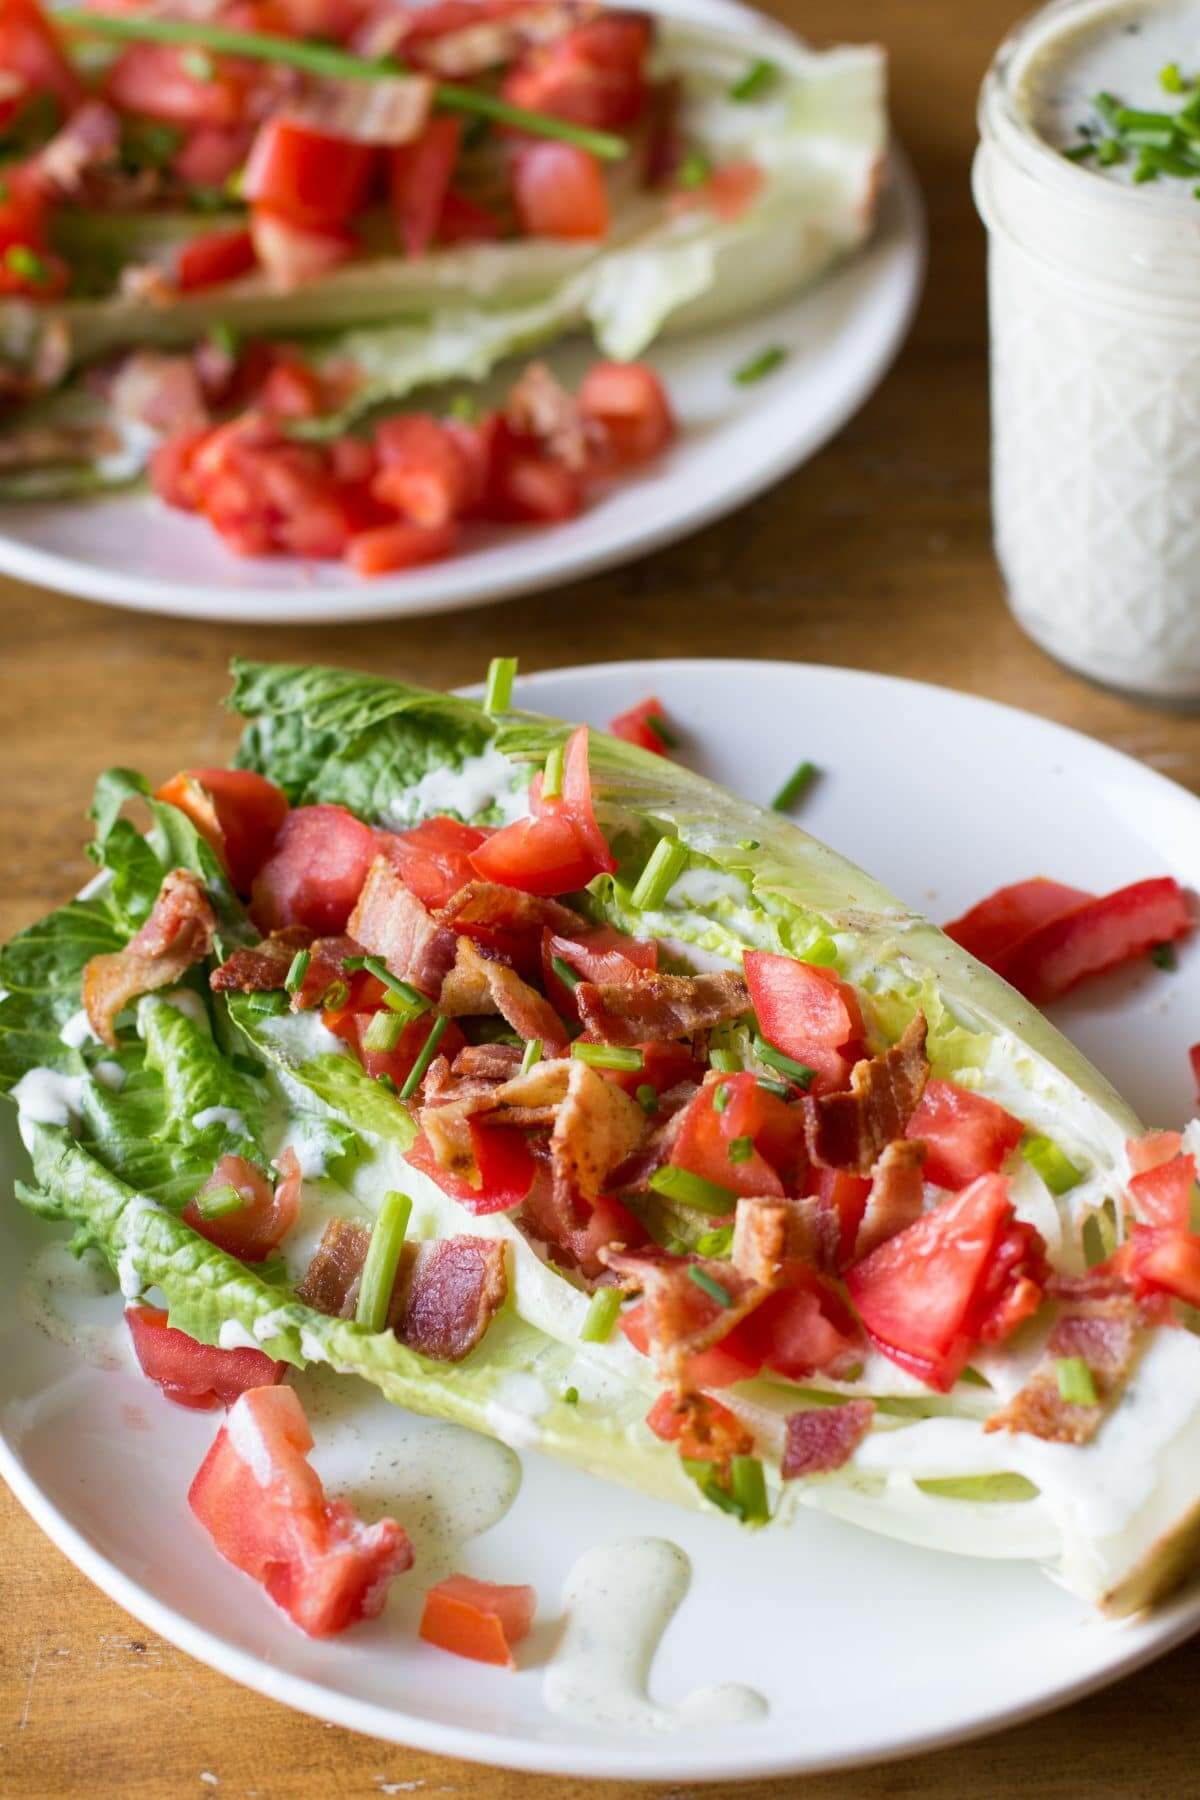 wedge of romaine lettuce with tomatoes, green onions and bacon.